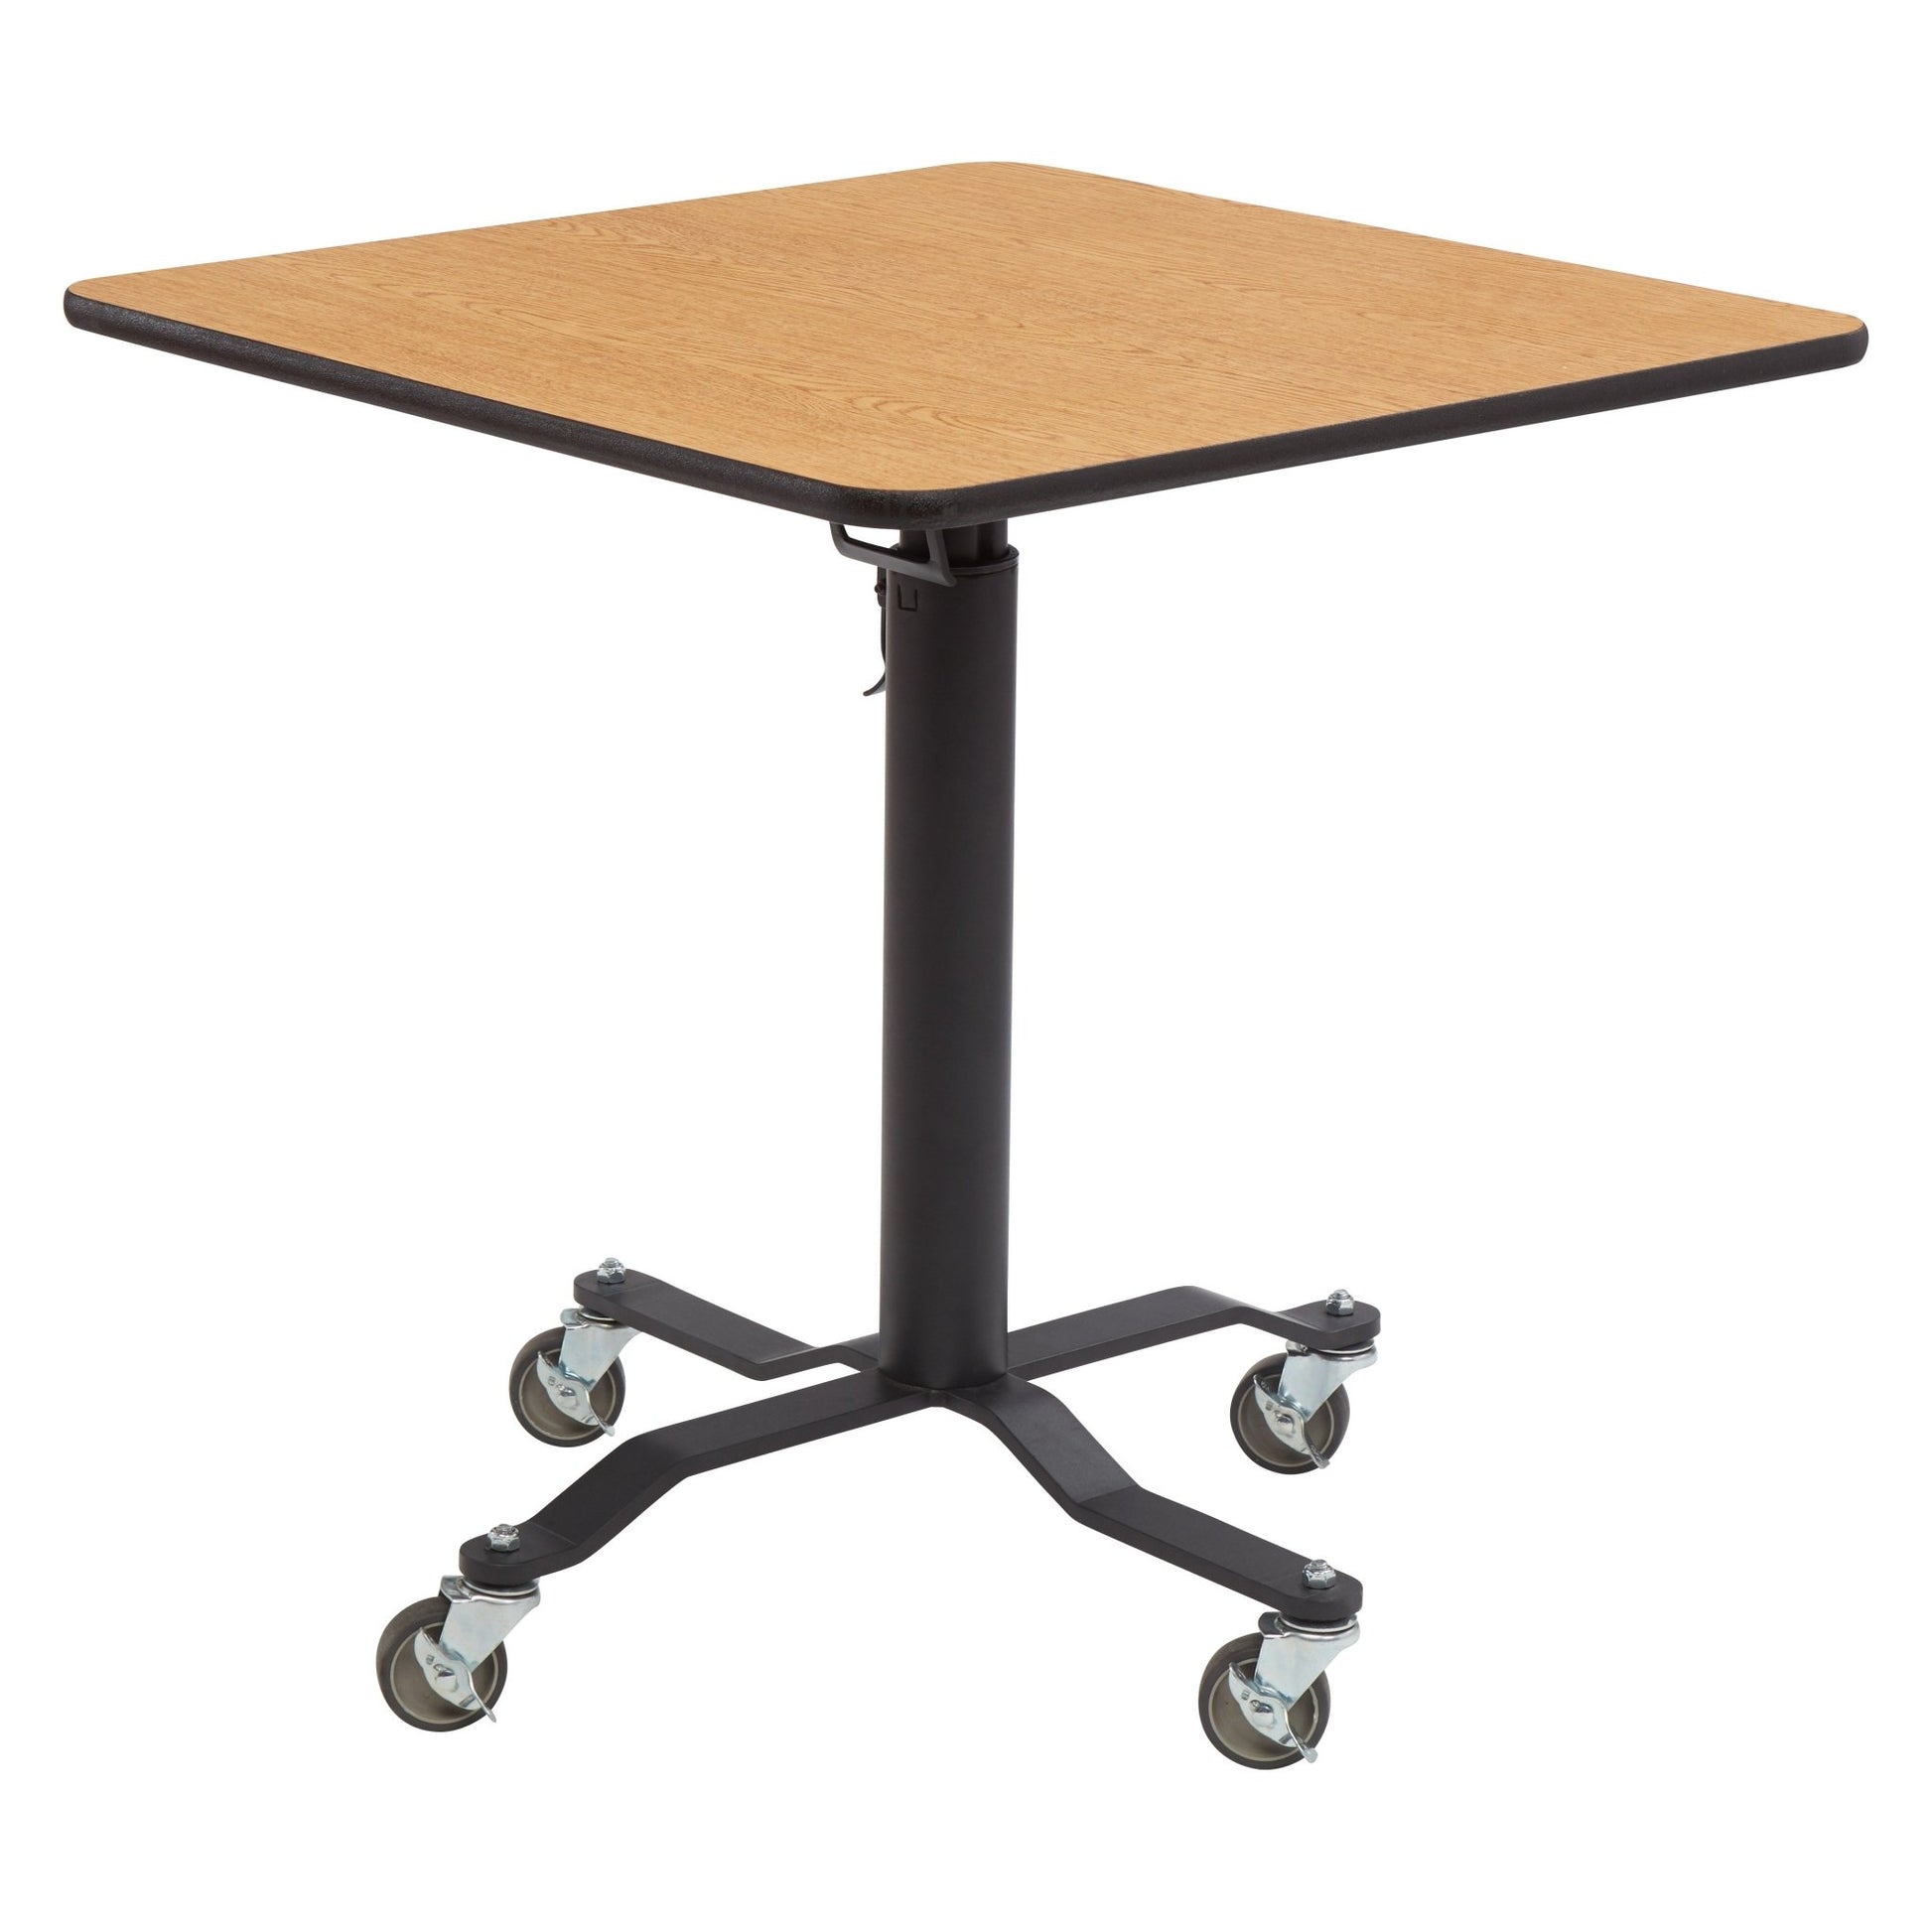 NPS Cafe Time II Table, 30" Square, High Pressure Laminate Top, ParticleBoard, Vinyl T-Molding (NationalPublic Seating NPS-PCT330PBTM) - SchoolOutlet